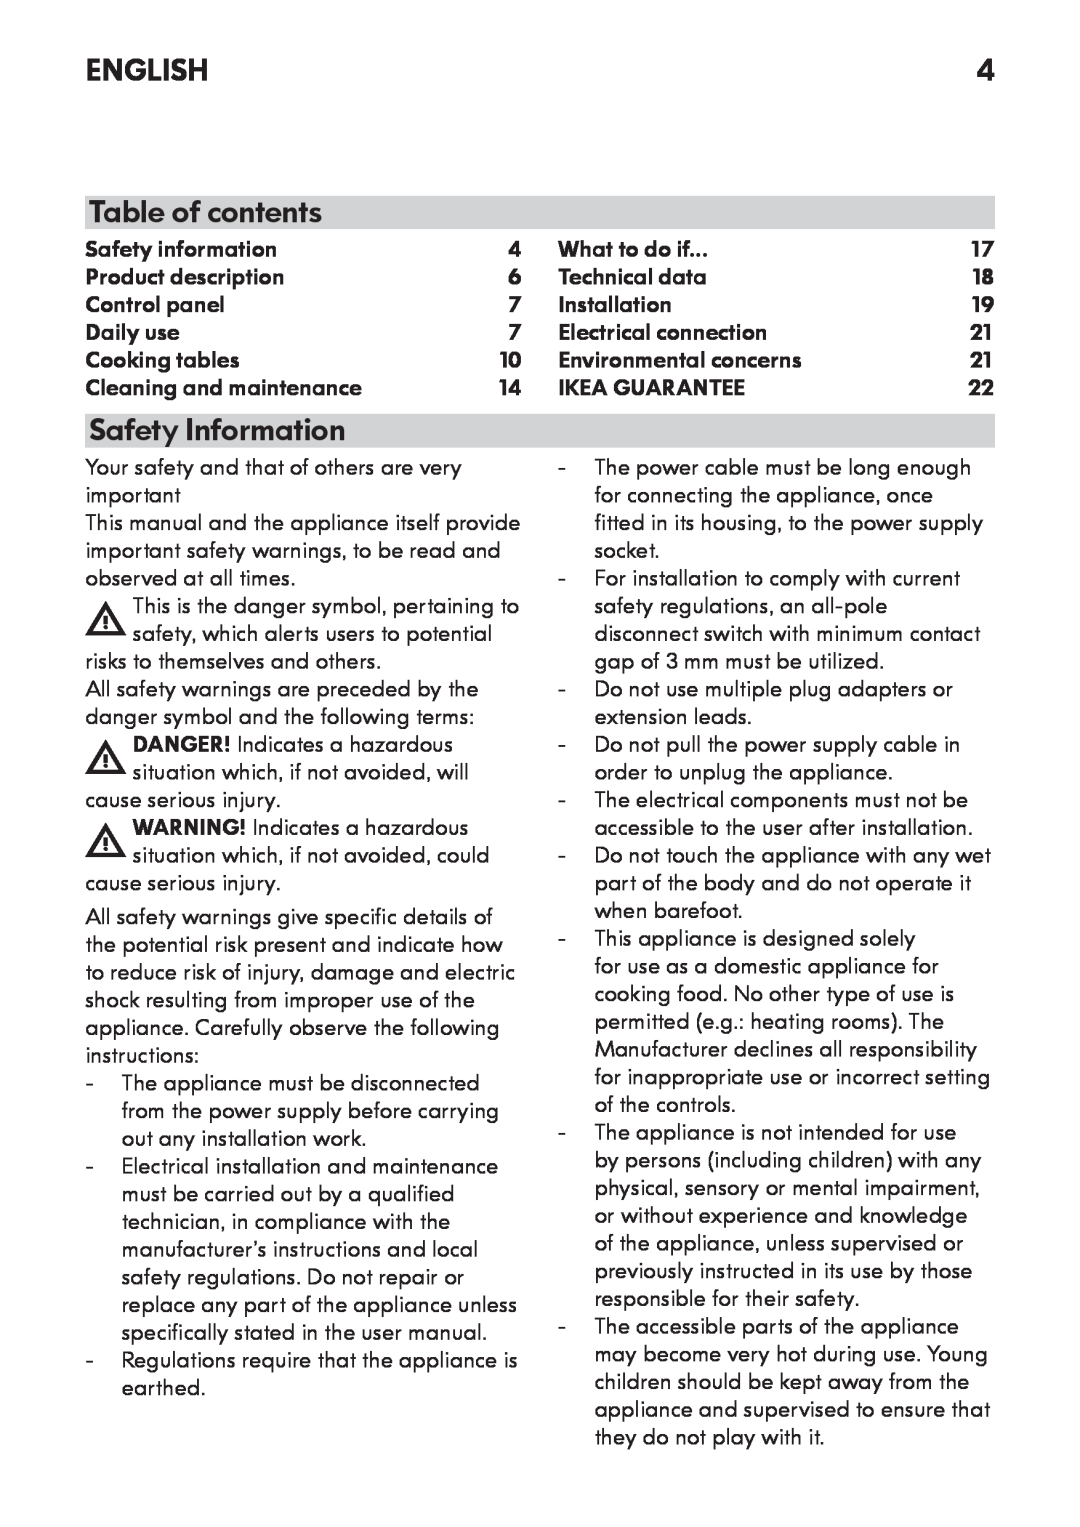 IKEA OV8 manual English, Table of contents, Safety Information 